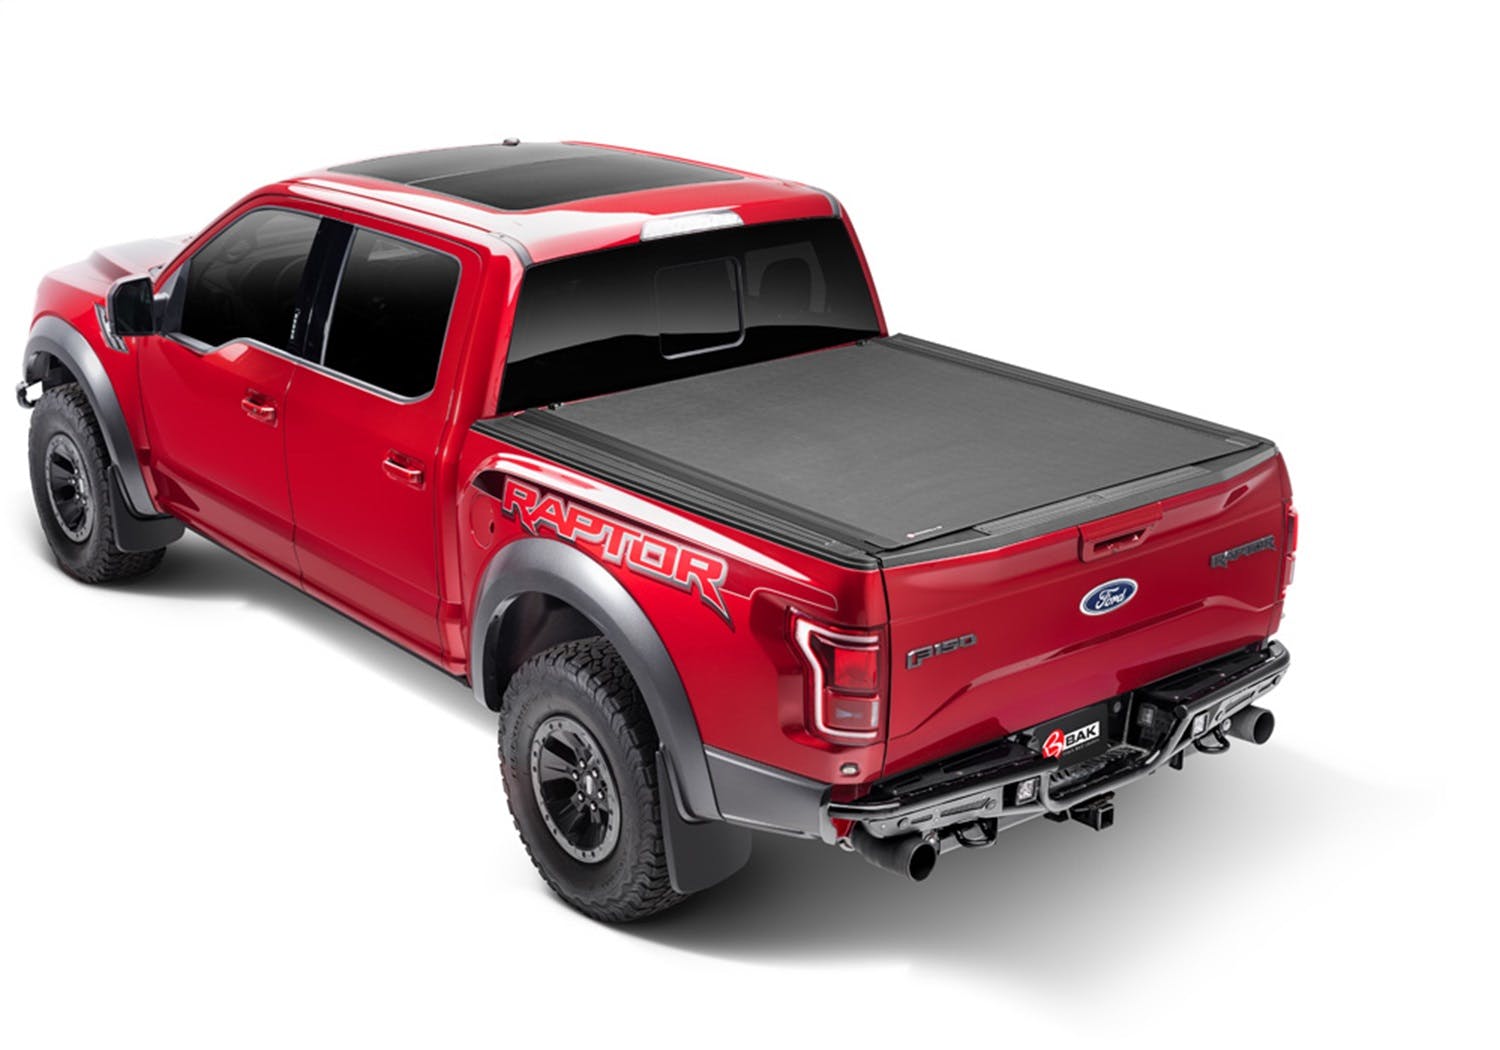 BAK Industries 80524 Revolver X4s Hard Rolling Truck Bed Cover